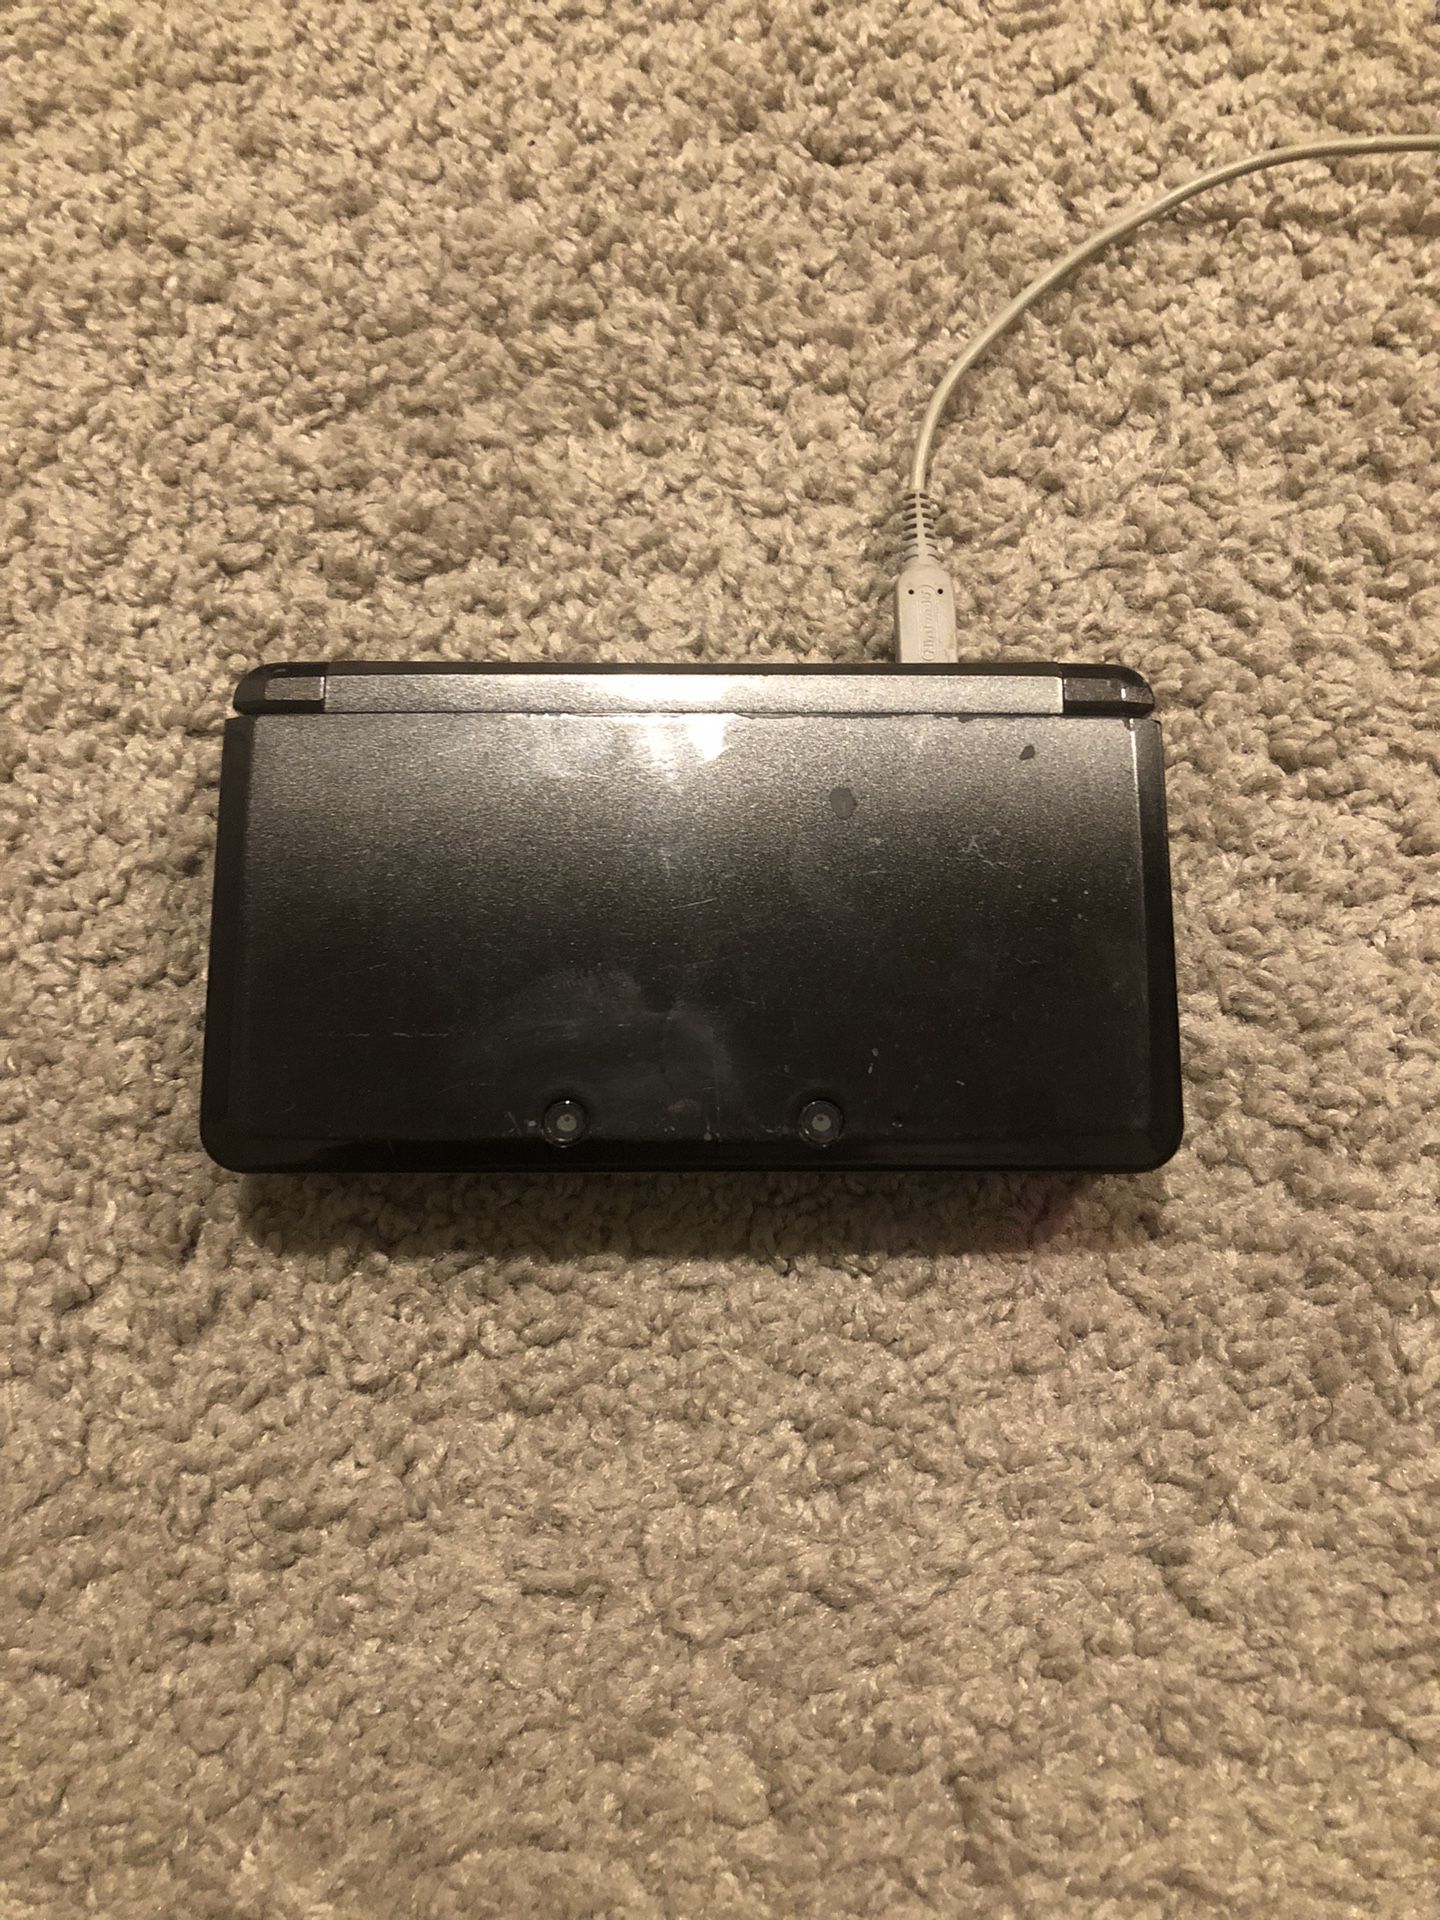 Nintendo 3DS (Auctioned Off on eBay)